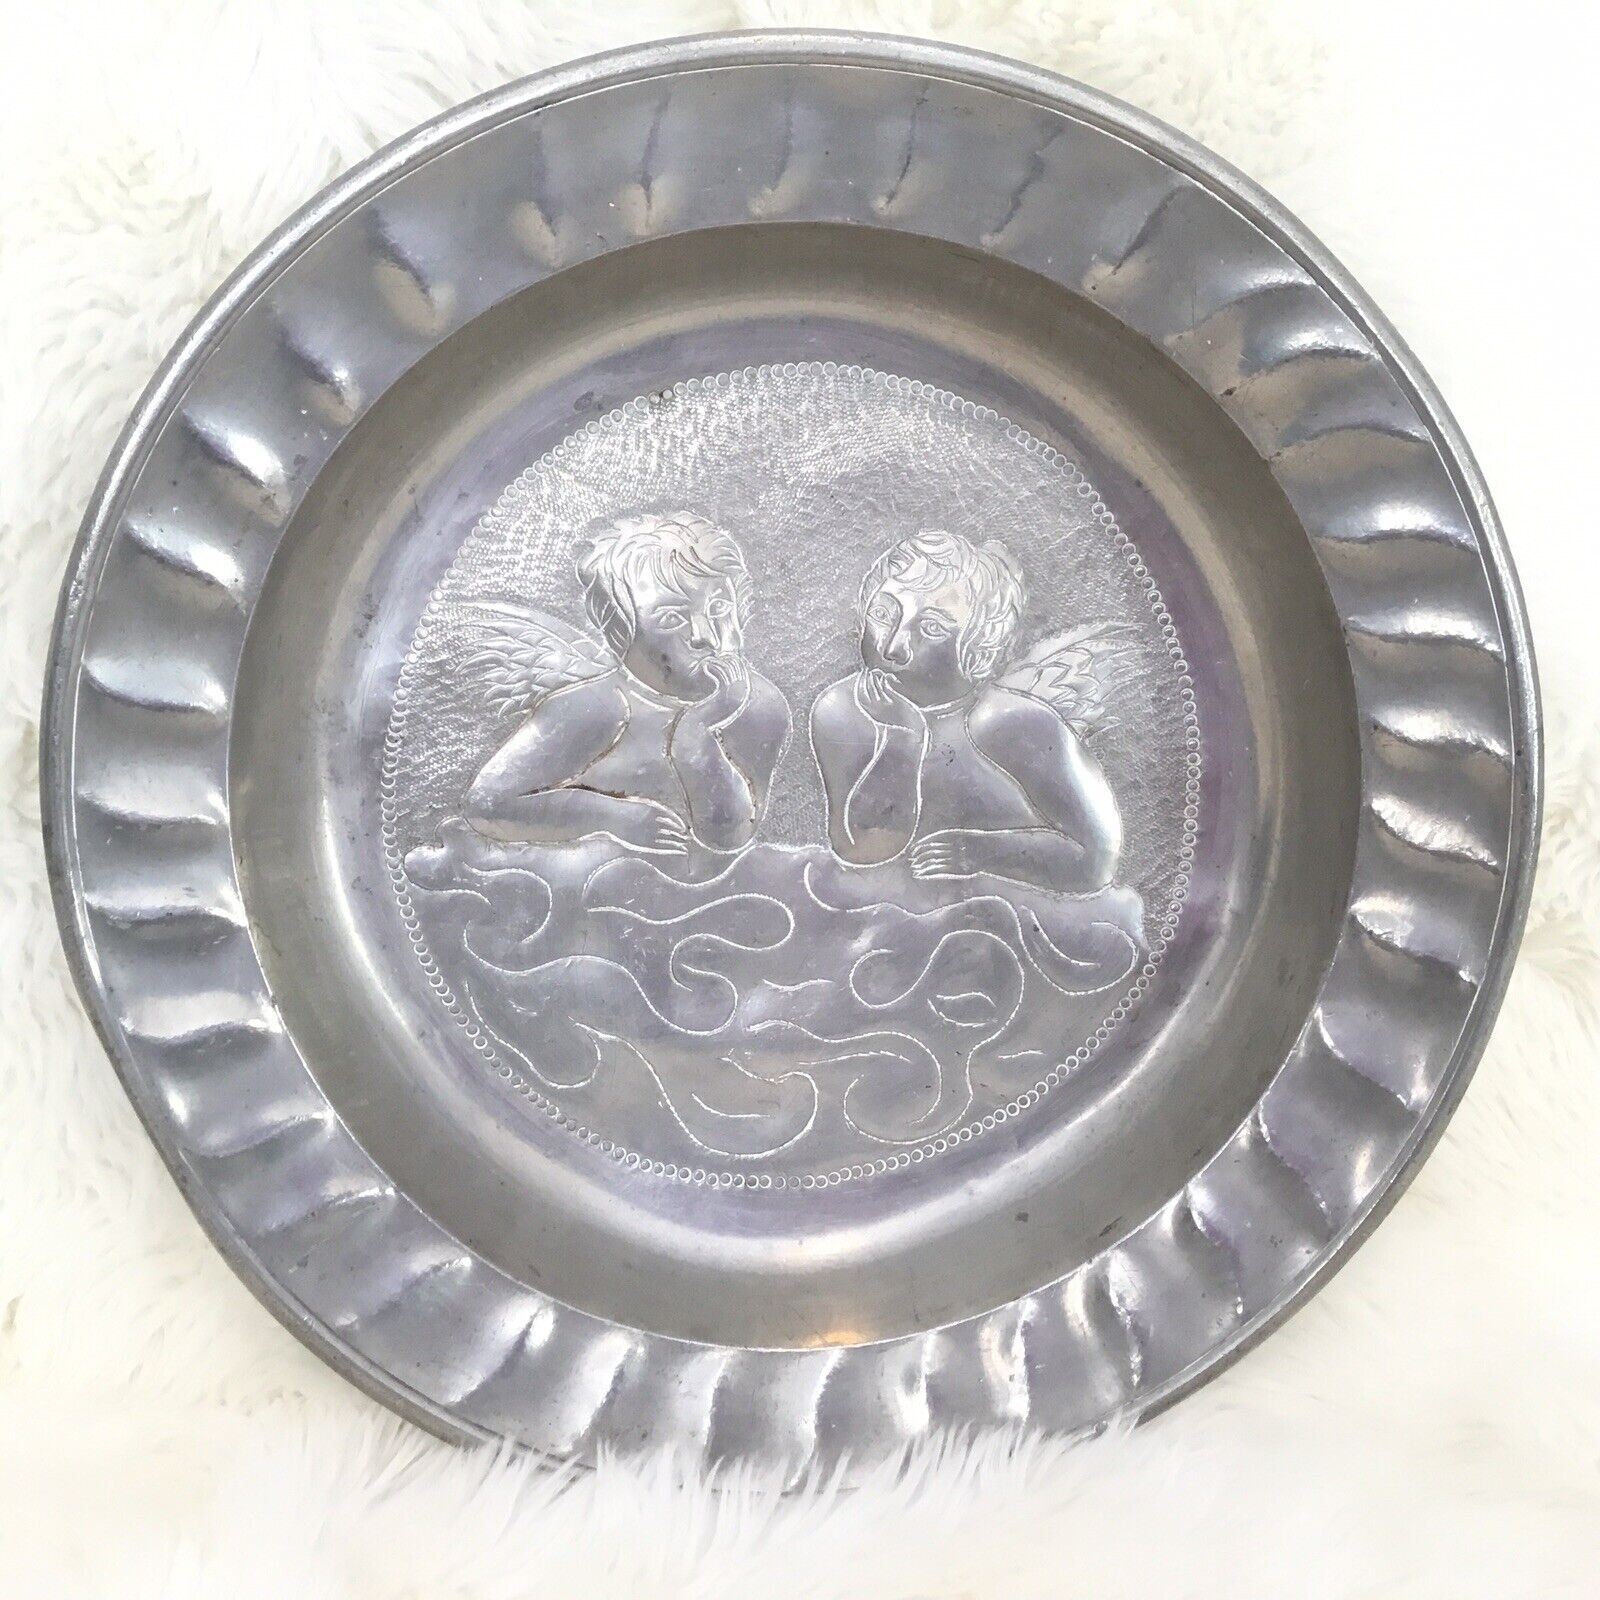 Antique Pewter Plate Hand Tooled Repouse Angels in the Clouds 17th-18th-19th c.?